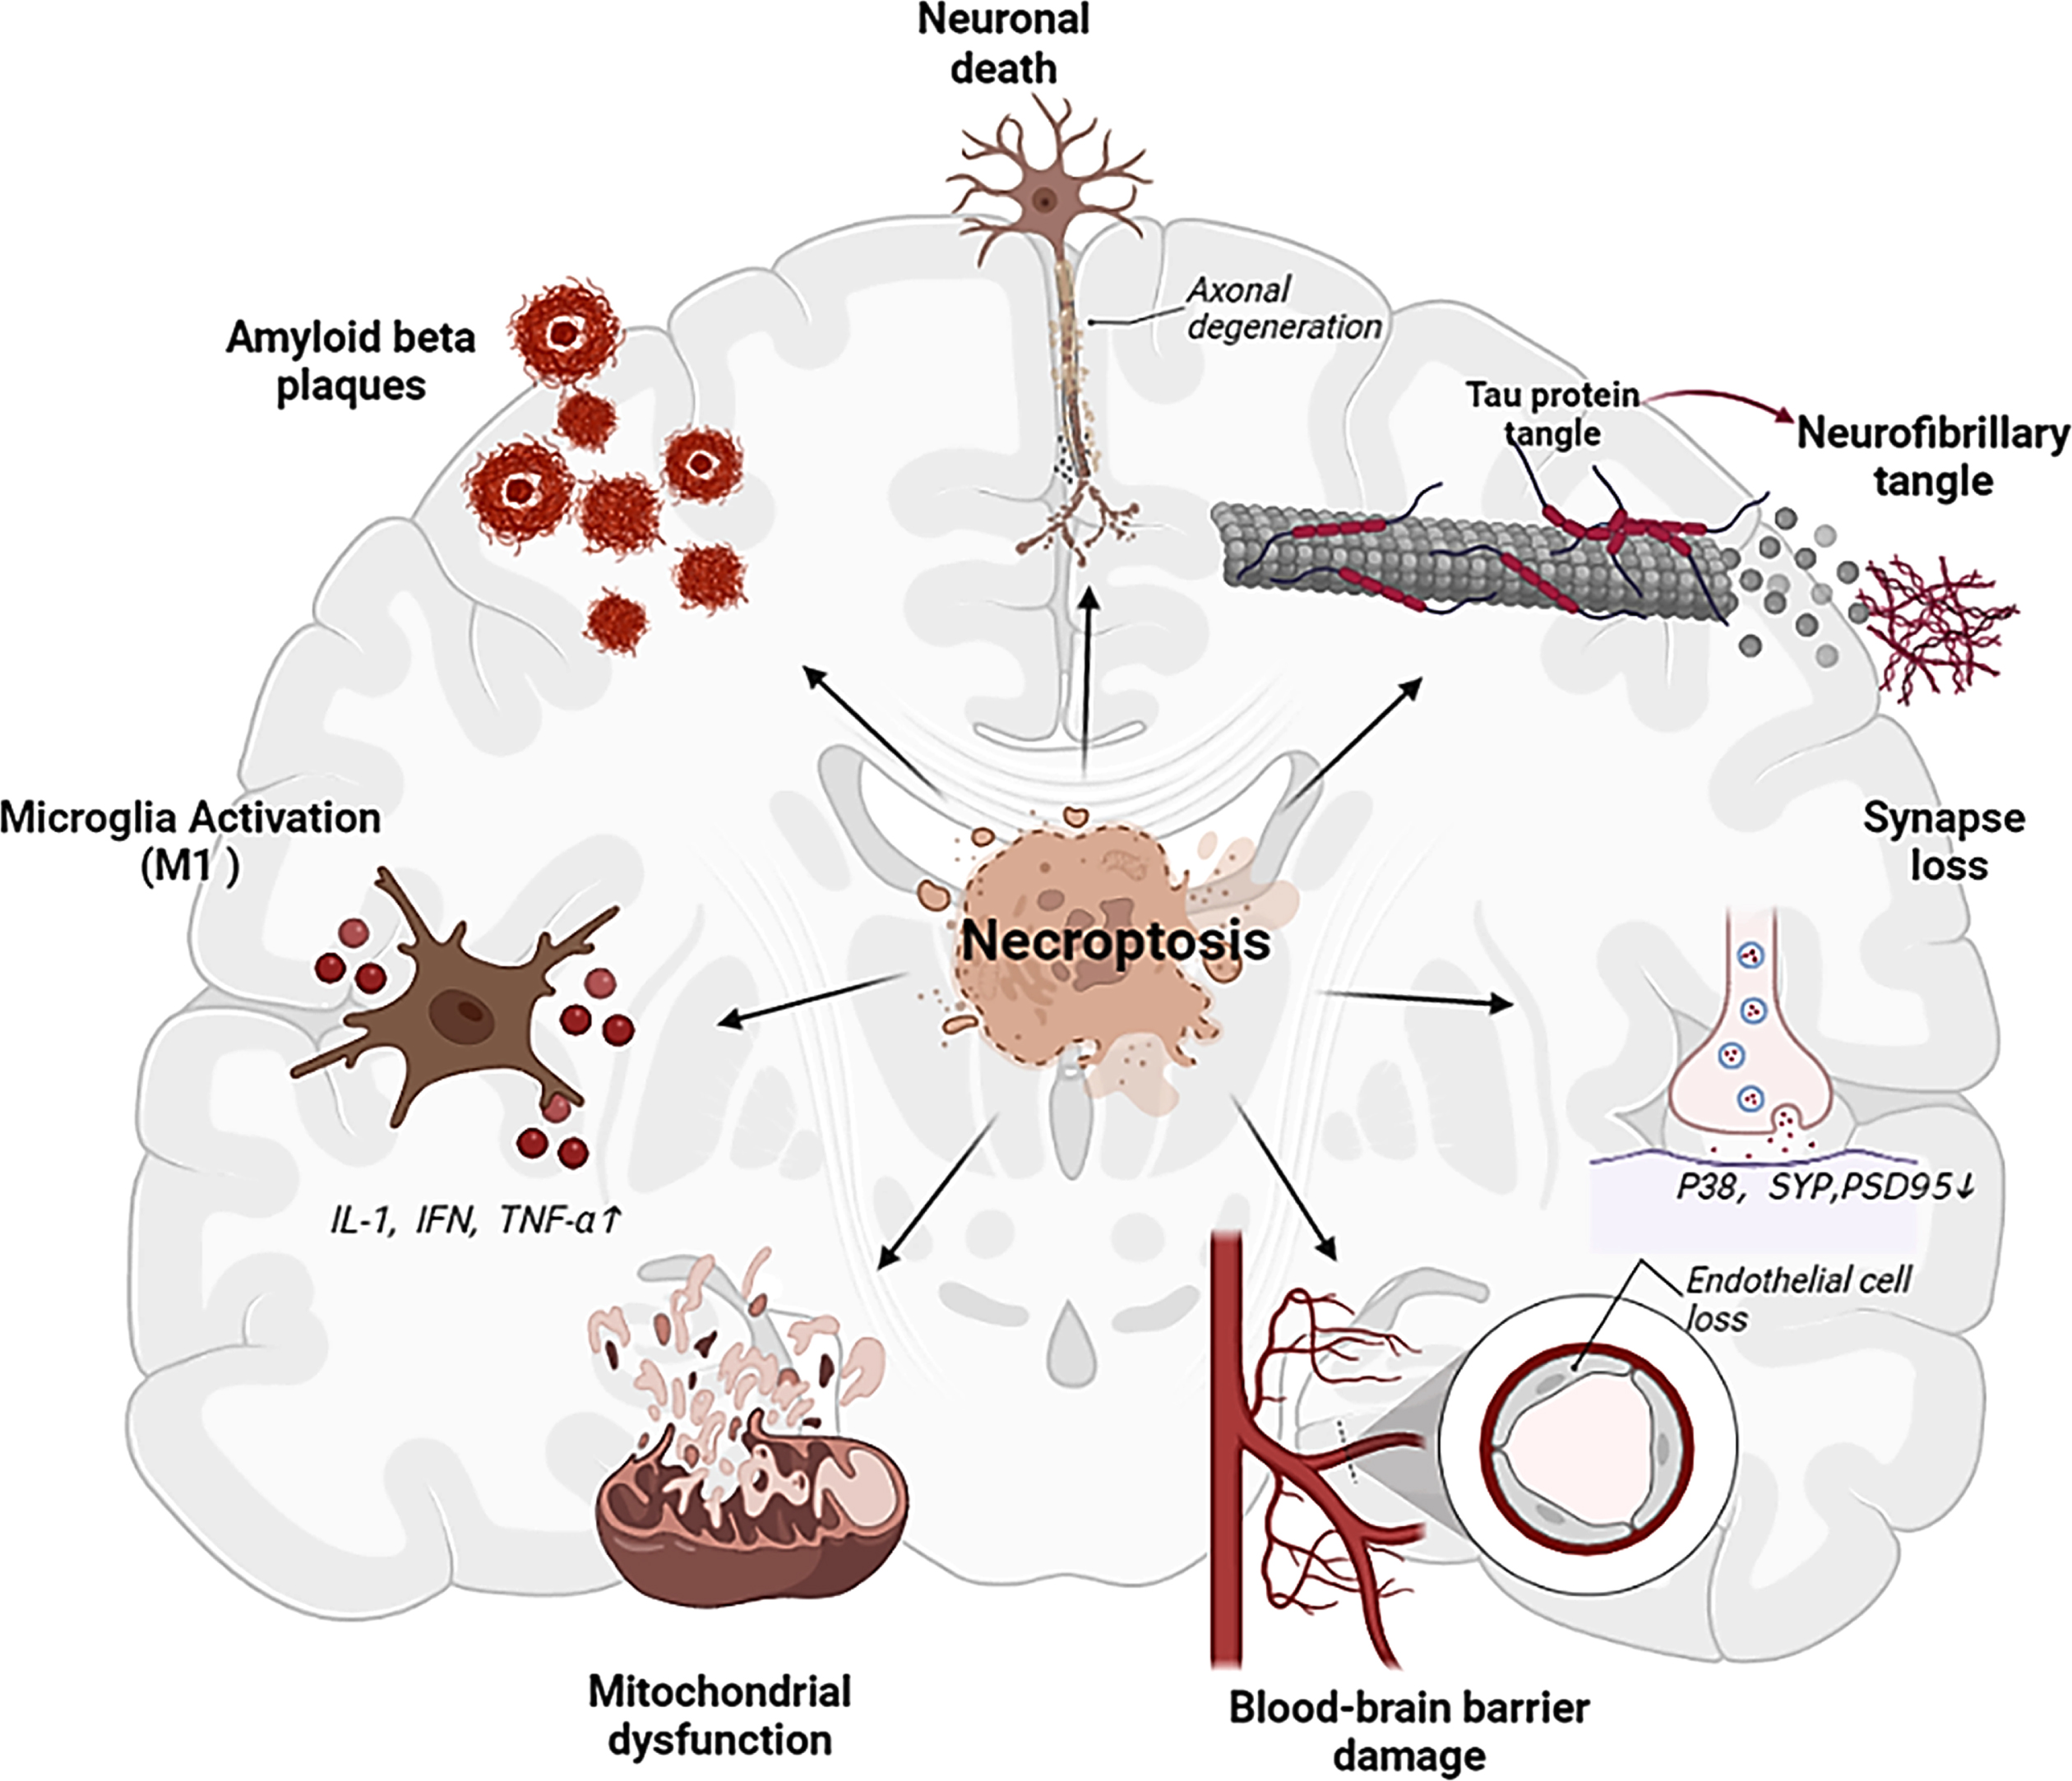 Multiple influences of necroptosis activation on AD related factors, which may serve as important triggers of cognitive impairment.